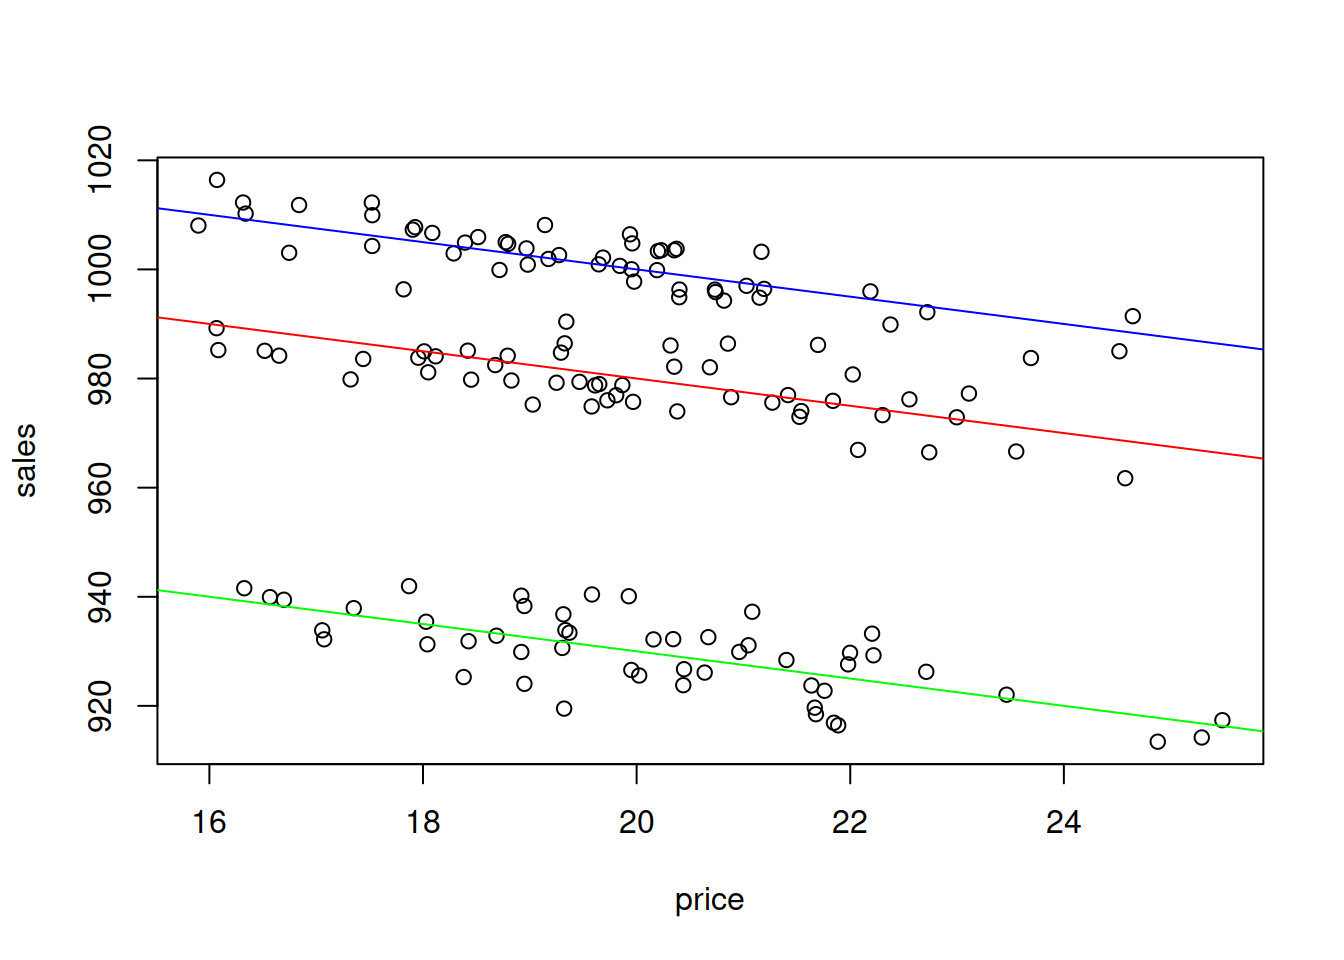 Scatterplot of Sales vs Price of t-shirts of different colour.